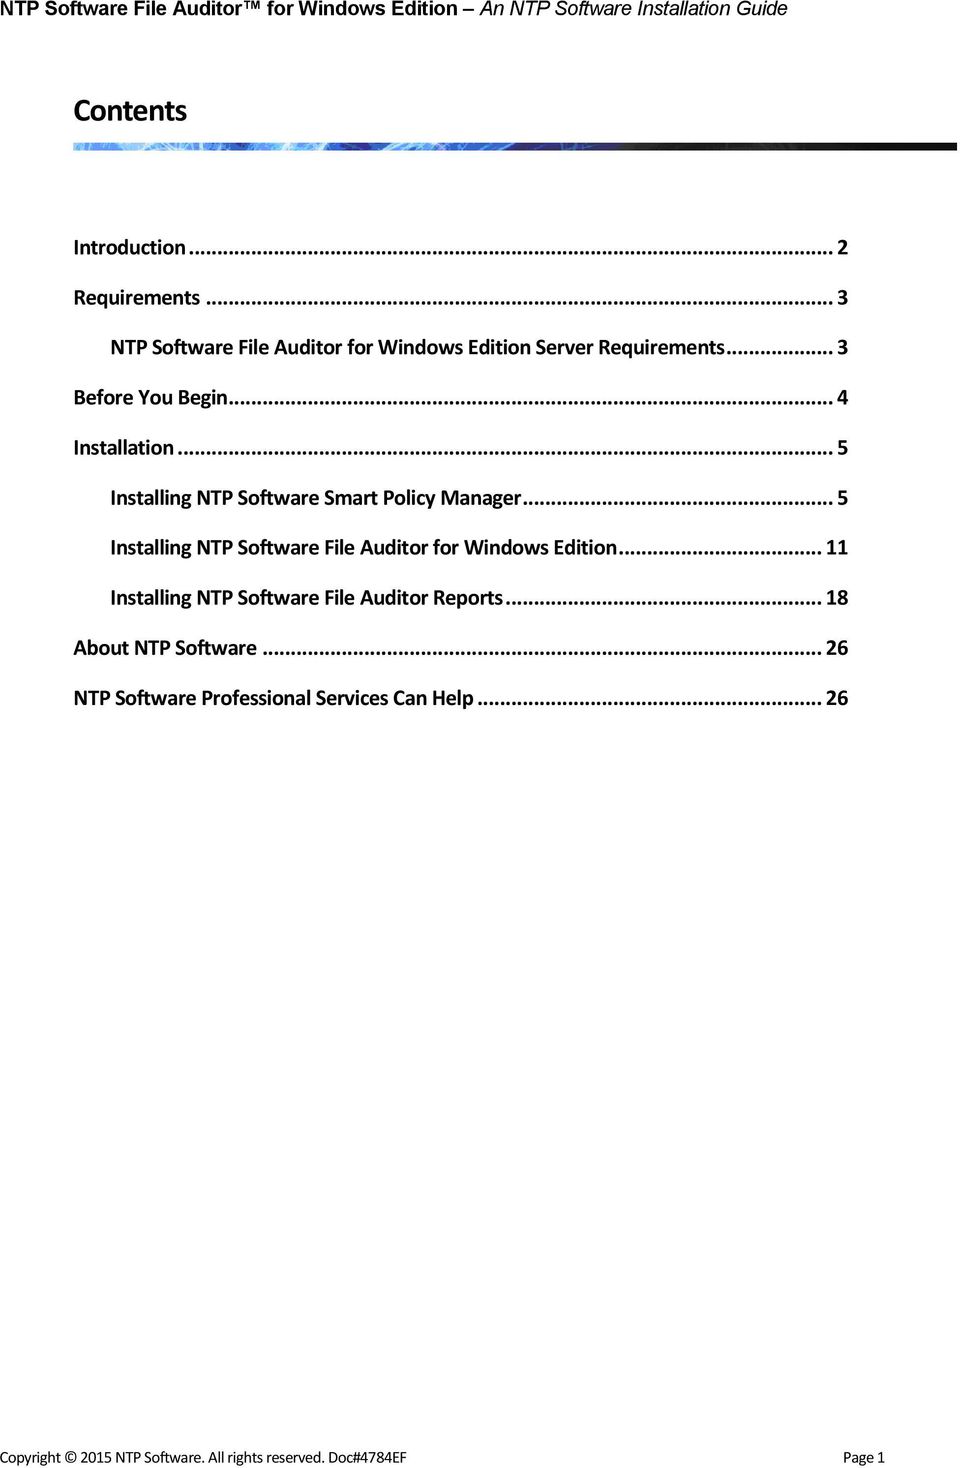 .. 5 Installing NTP Software File Auditor for Windows Edition... 11 Installing NTP Software File Auditor Reports.